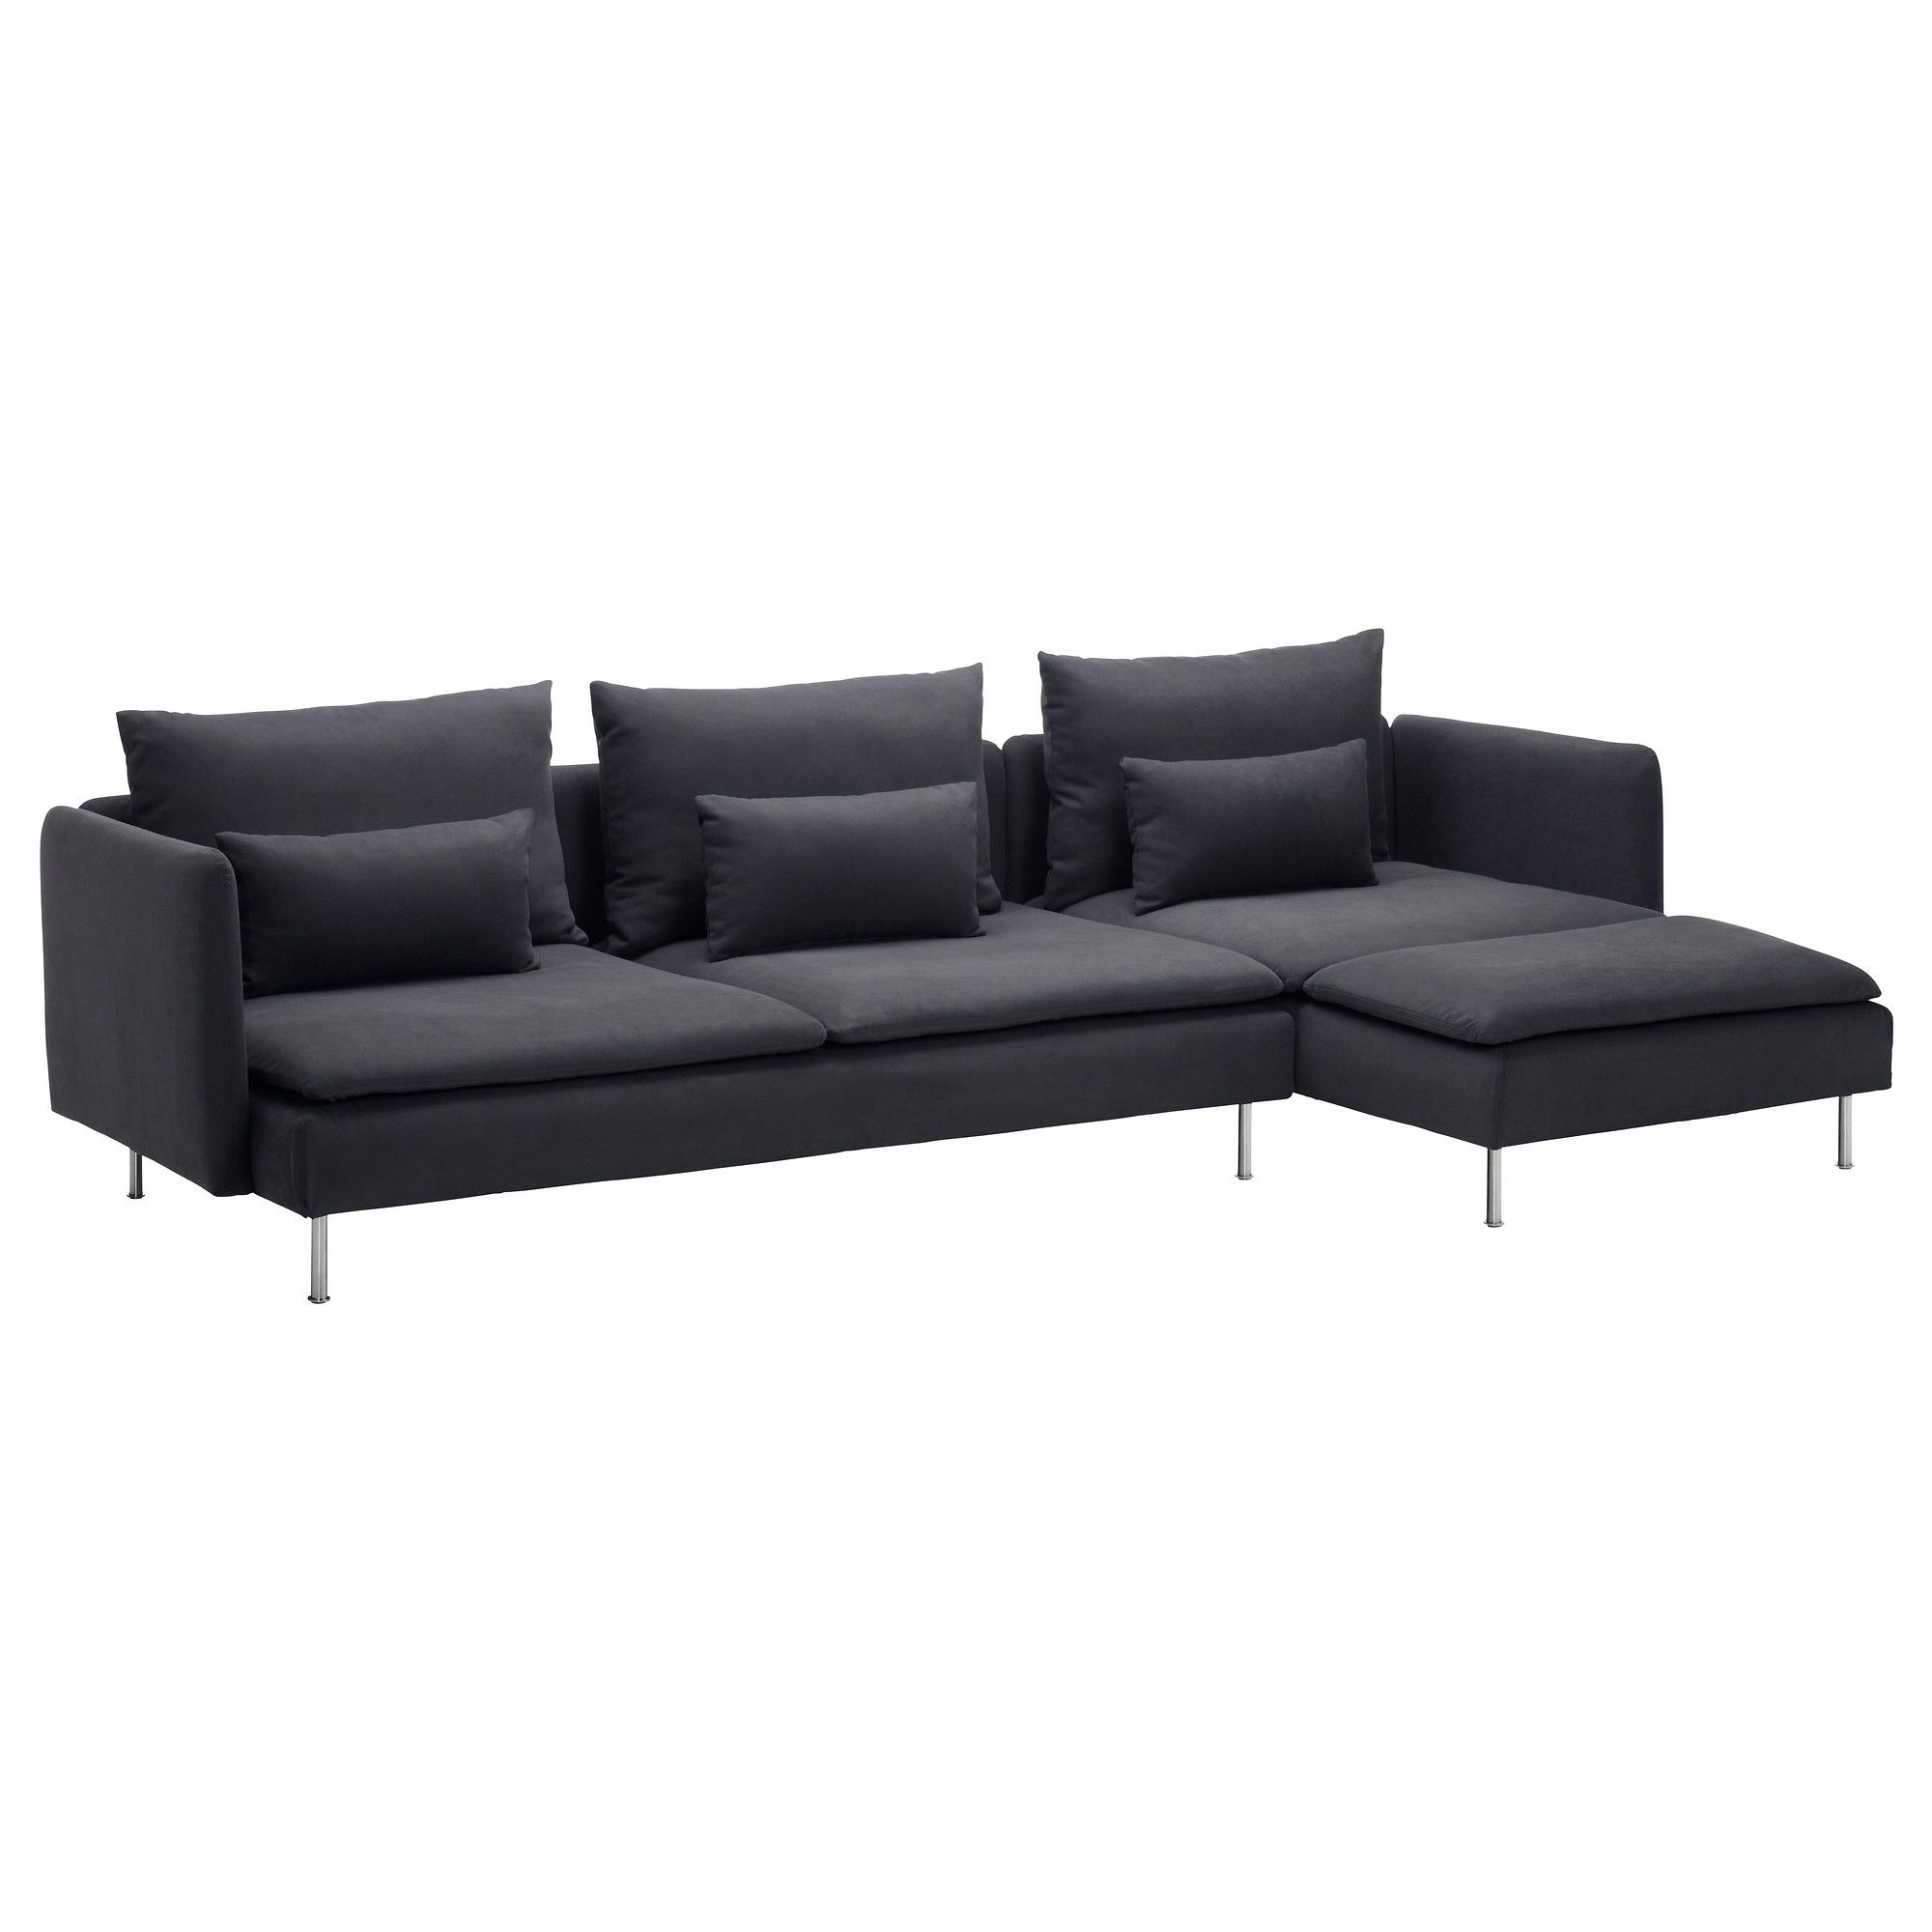 Preferred Söderhamn Sectional, 4 Seat – With Chaise/finnsta Turquoise – Ikea Within Ikea Sectional Sofa Beds (View 9 of 20)